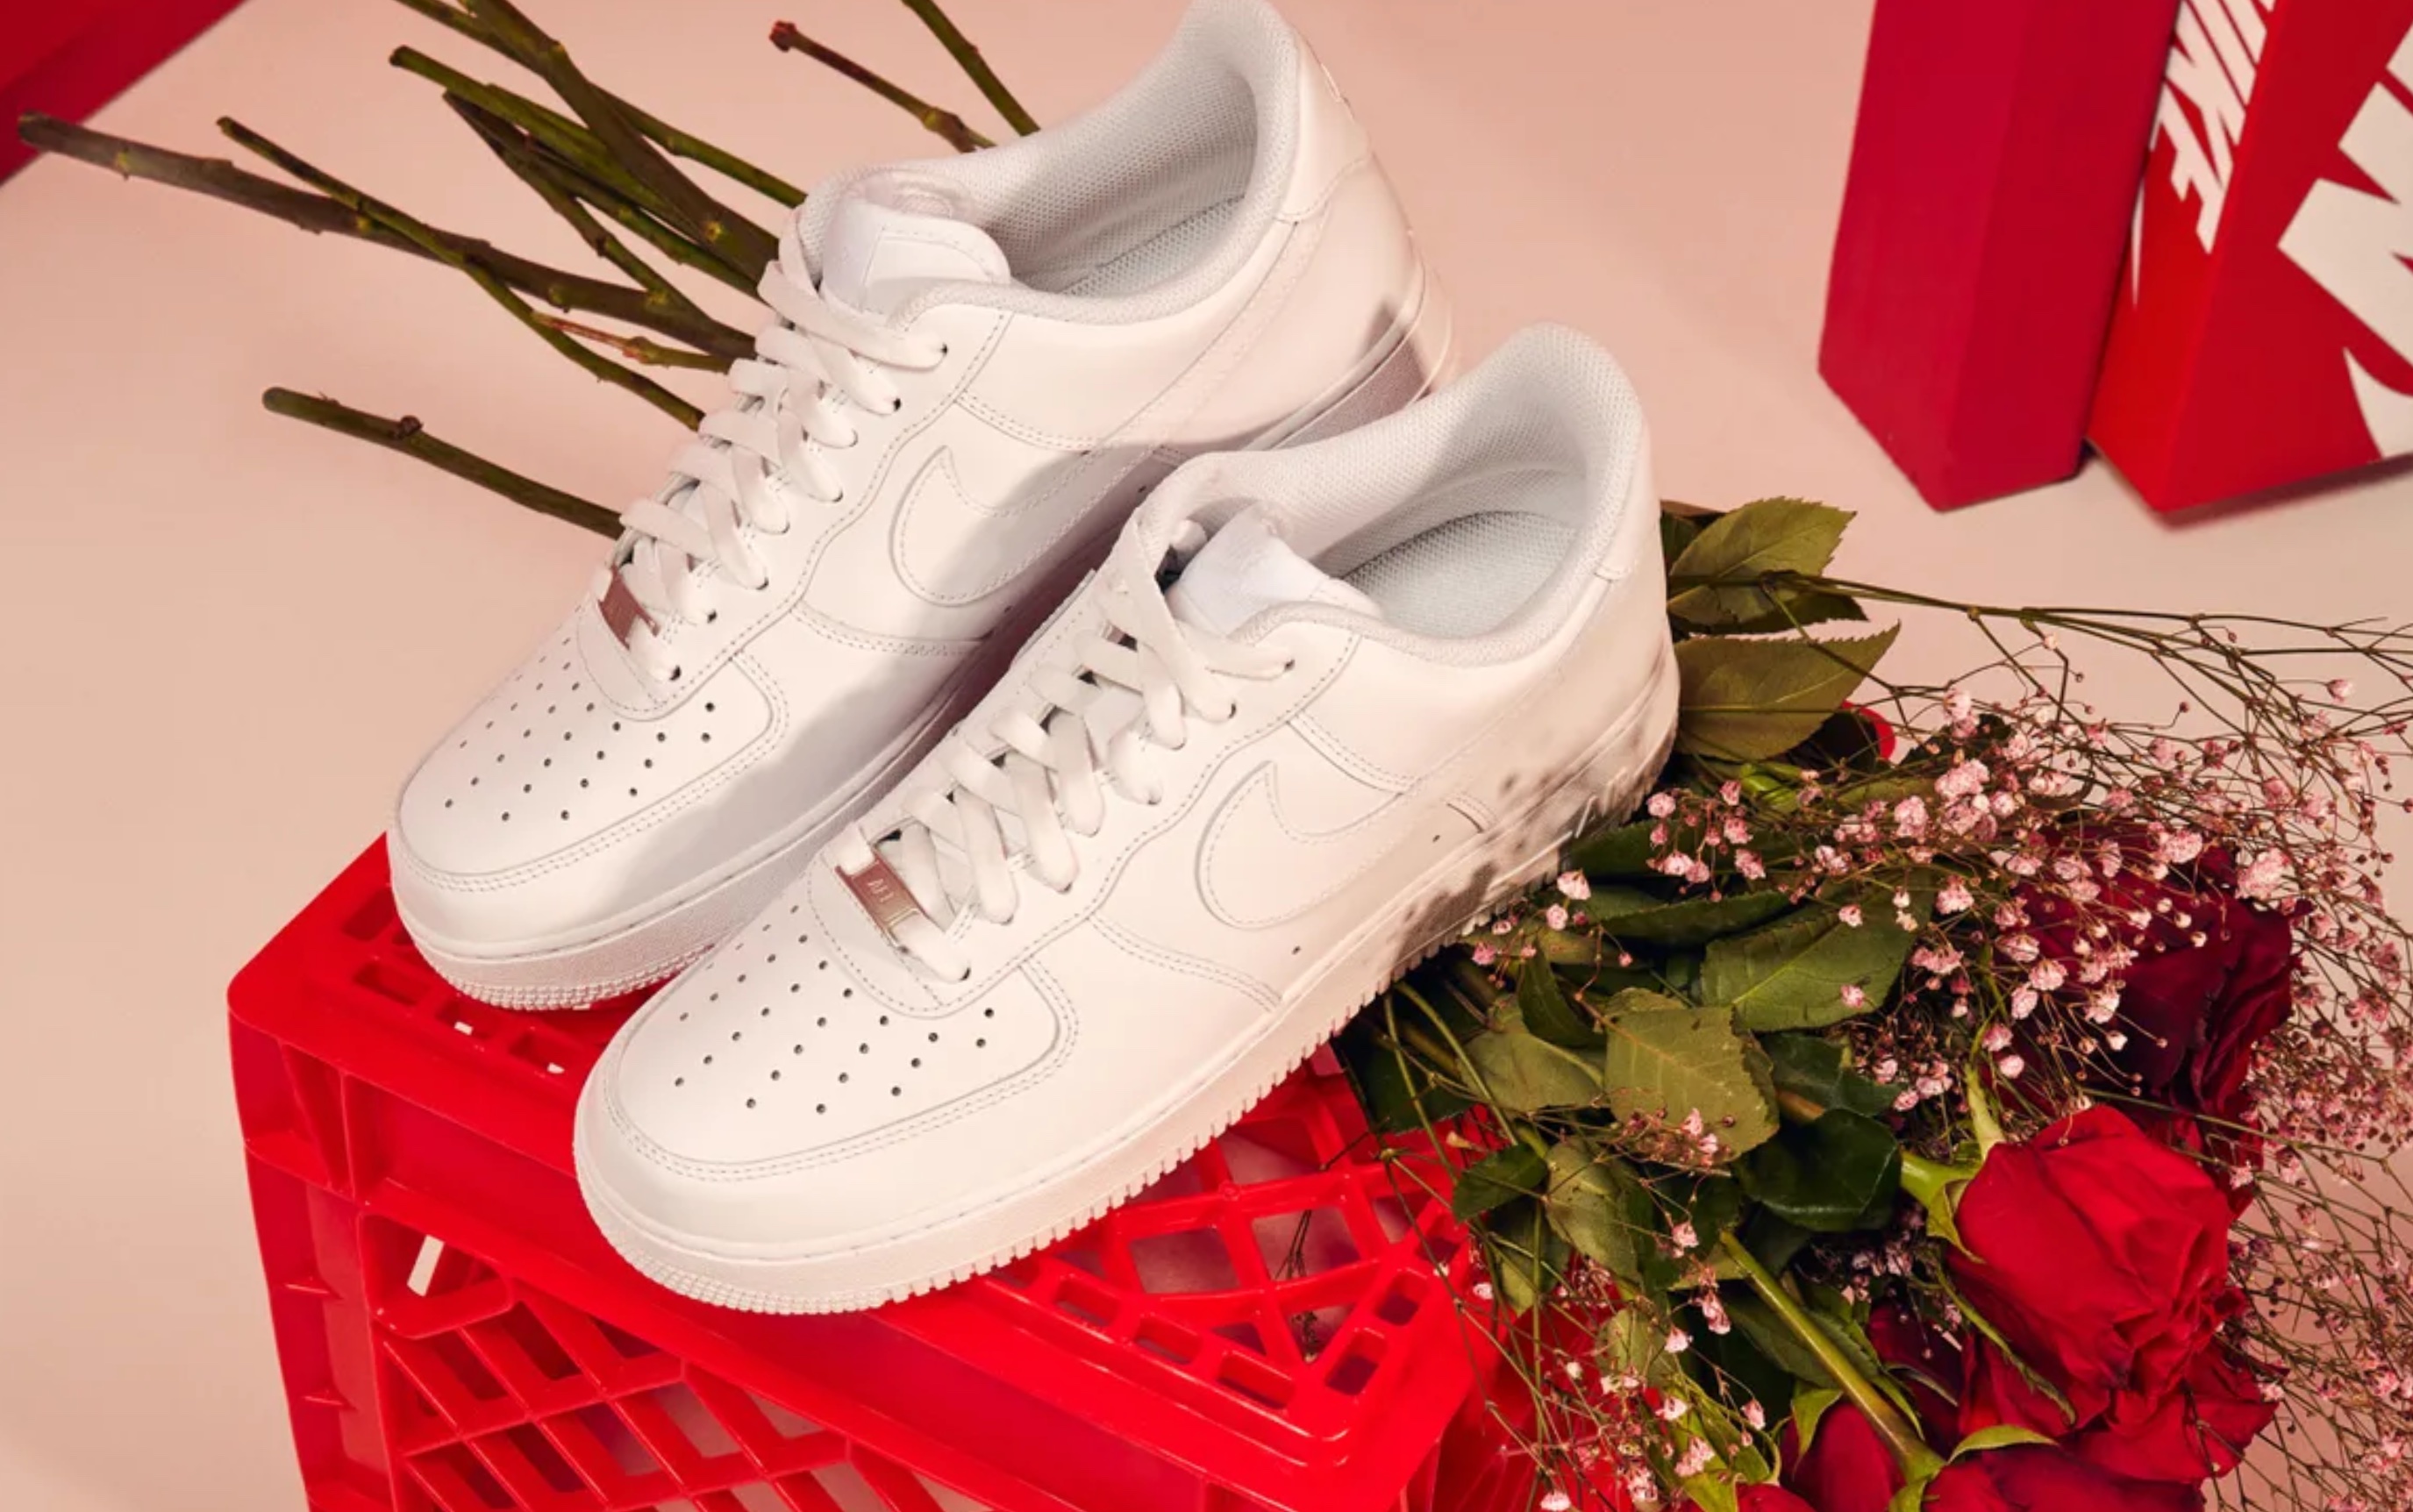 Nike's Valentine's Day offers over 300 styles from - 9to5Toys